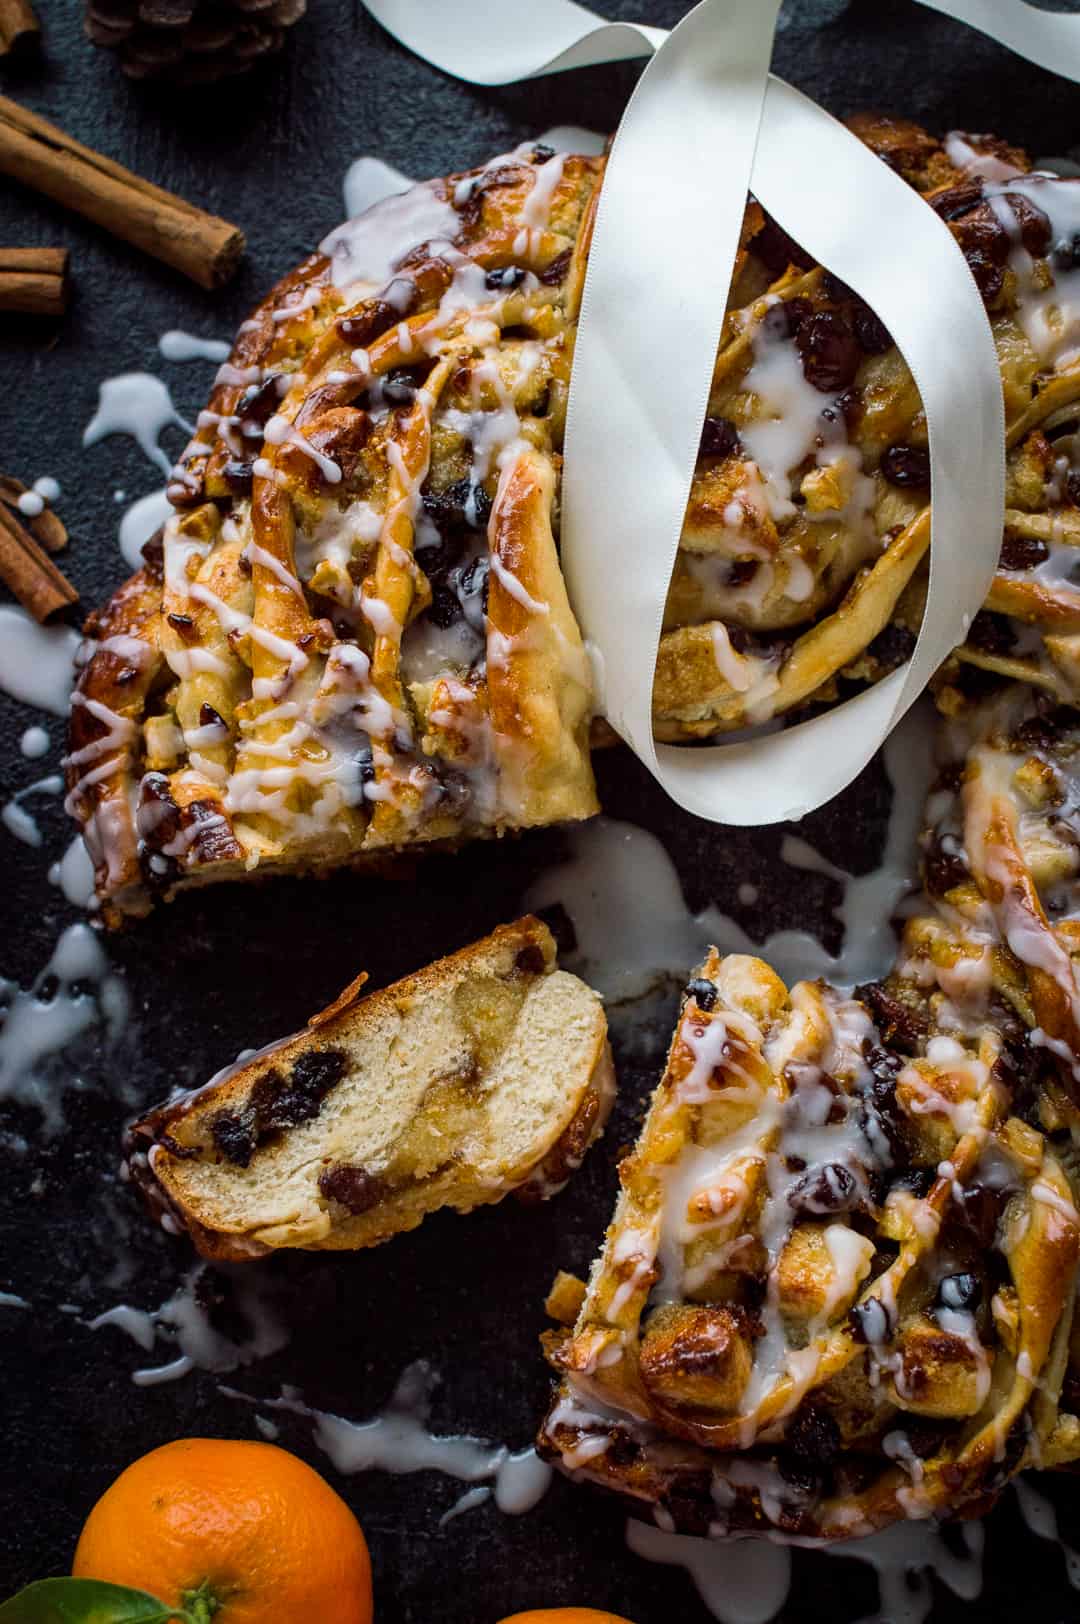 A close up of sliced mincemeat, marzipan and apple bread wreath to show the crumb.